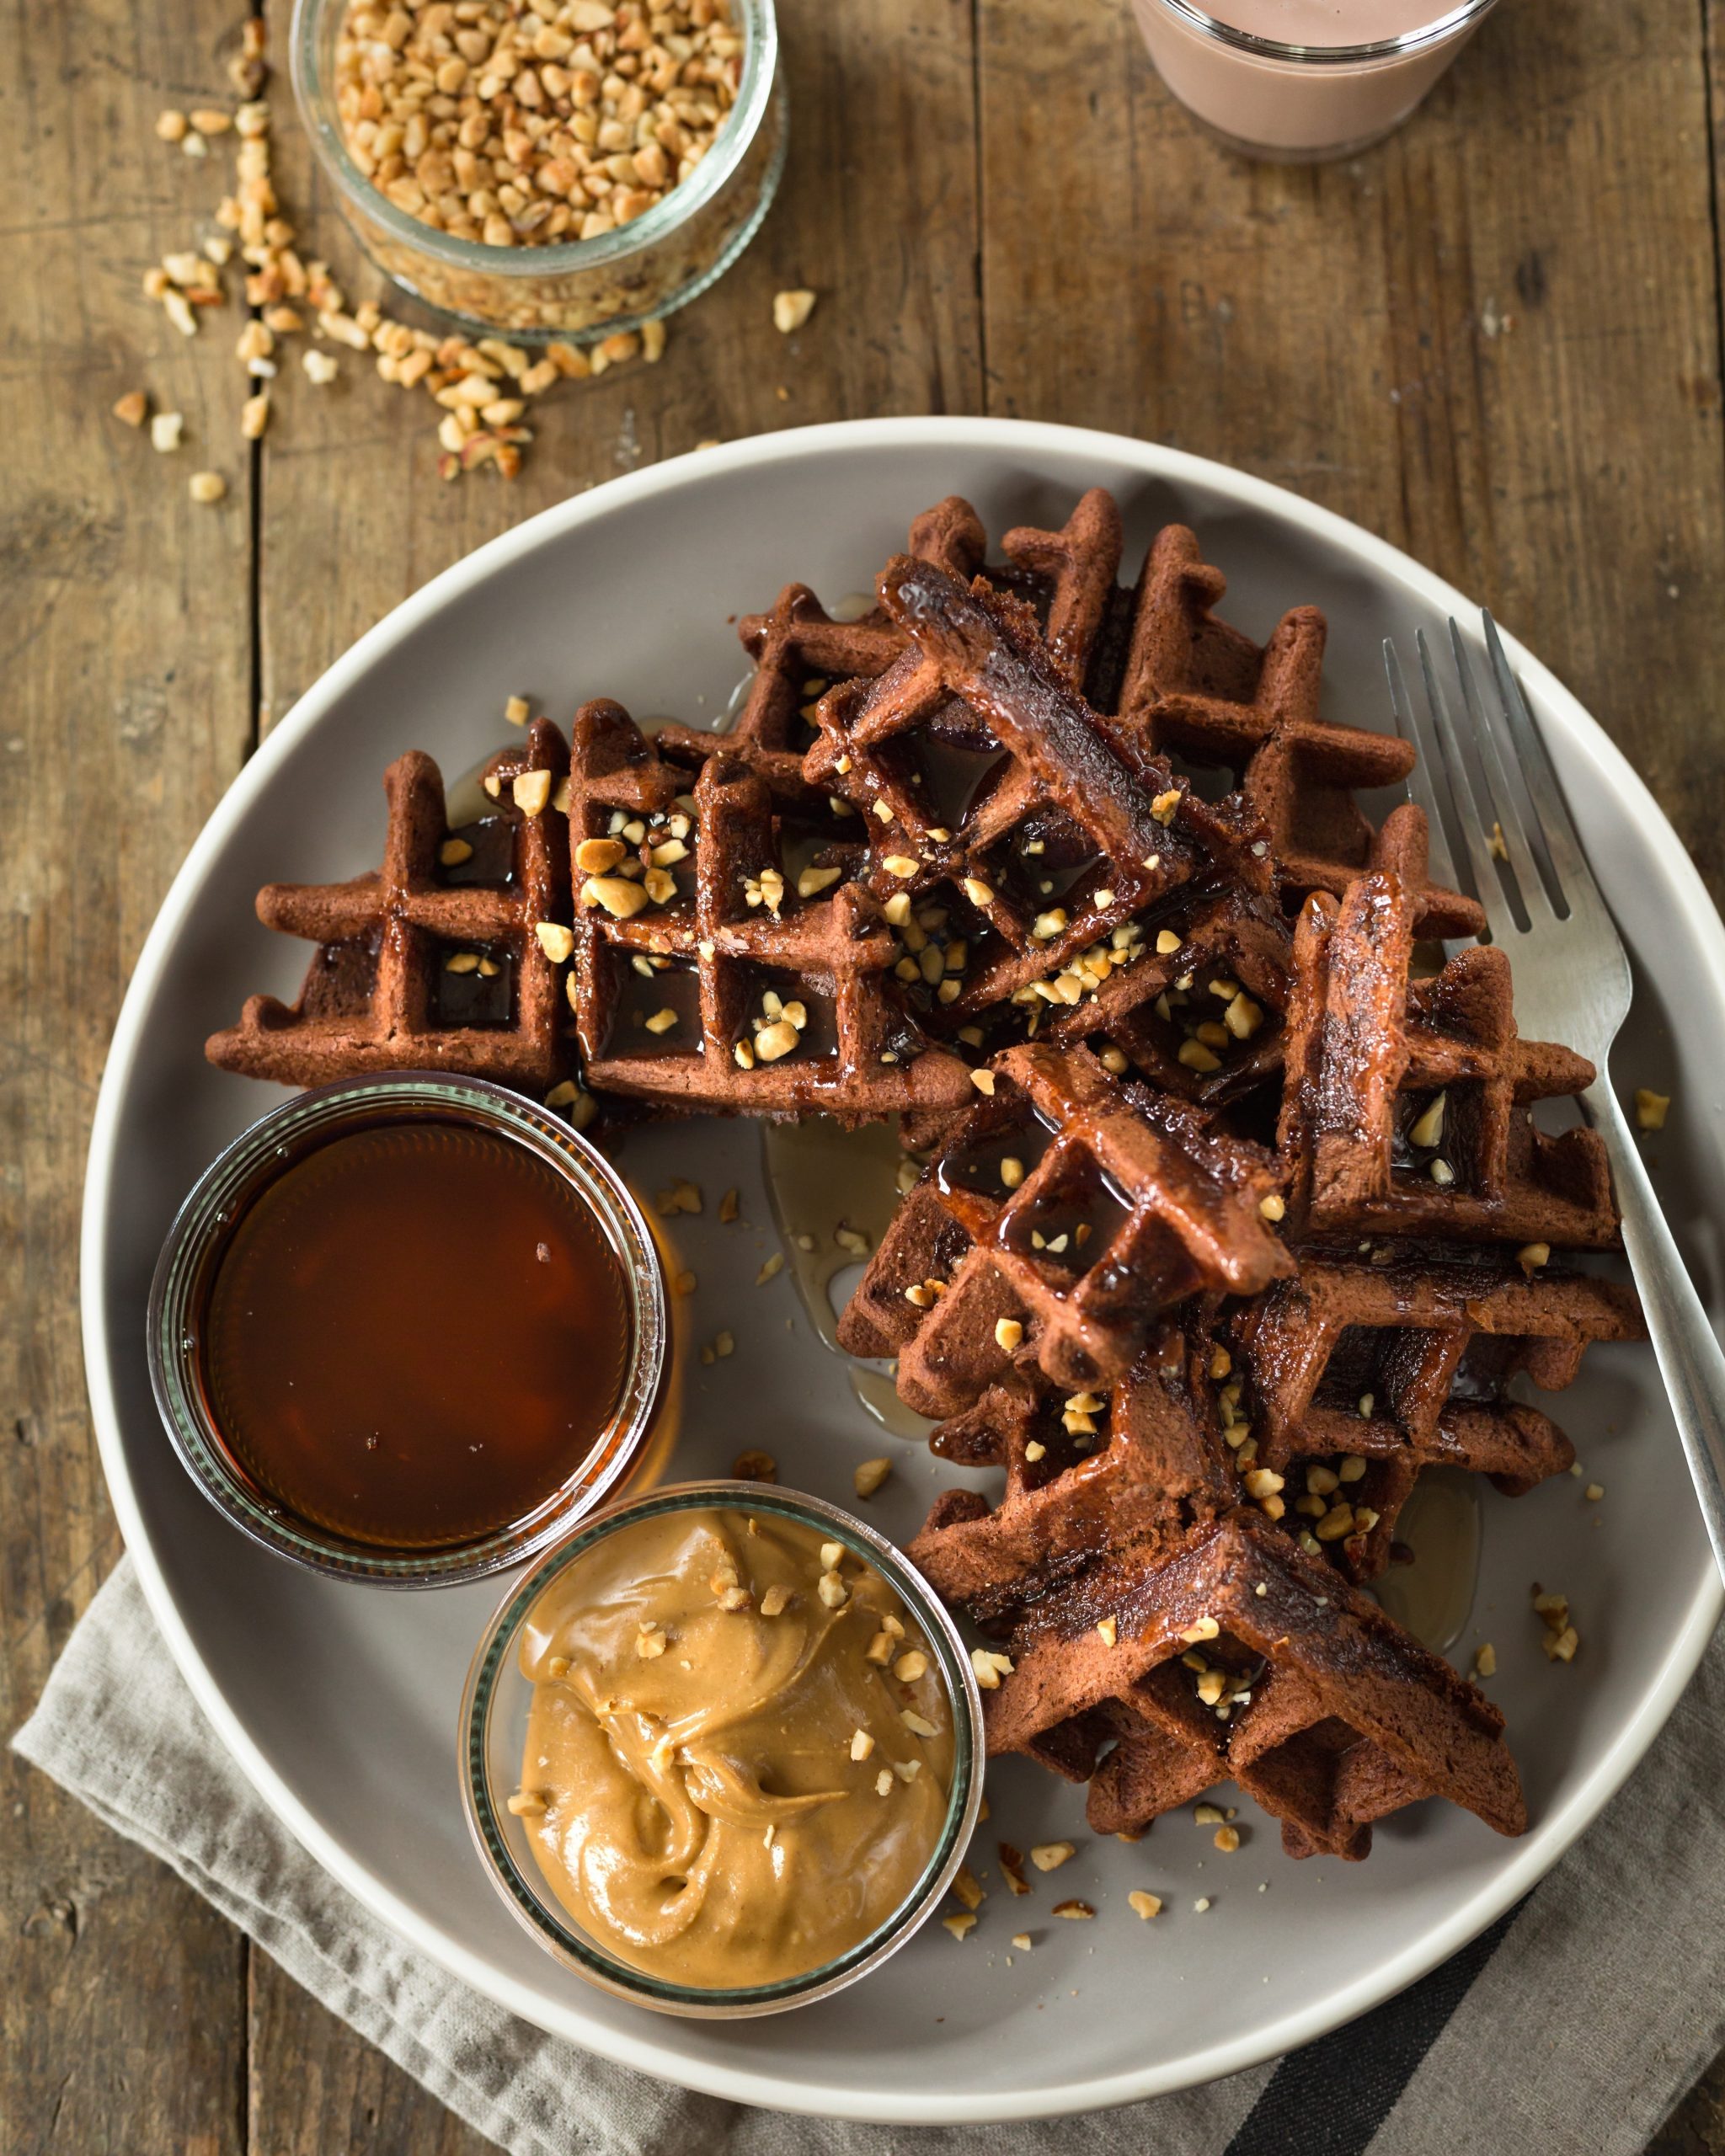 Chocolate and Peanut butter waffles